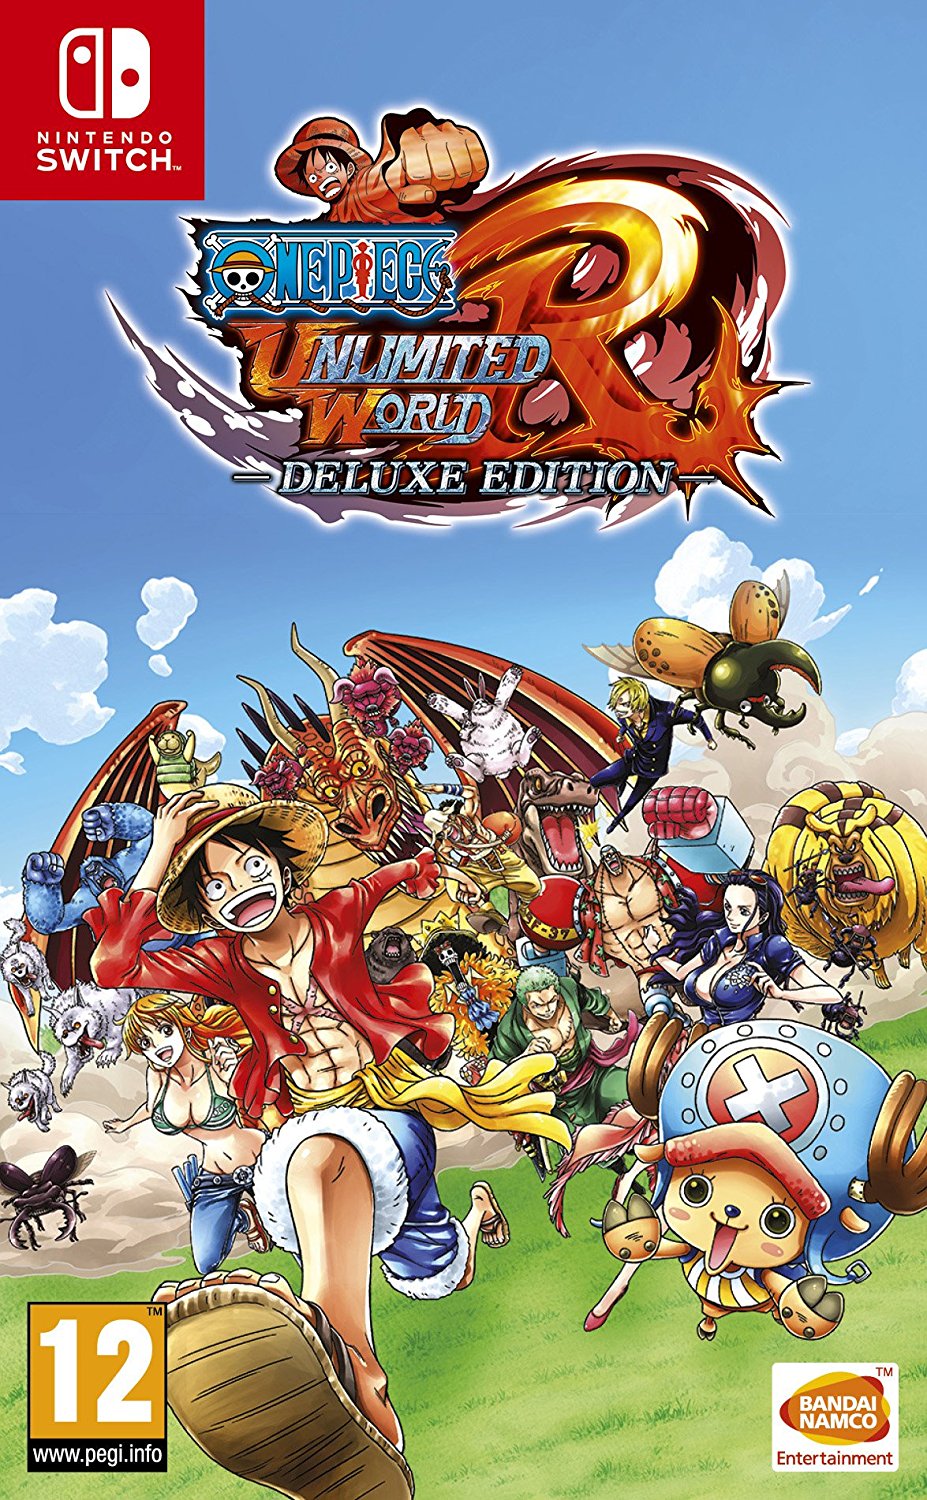 one-piece-unlimited-world-red-deluxe-edition-boxart.jpg